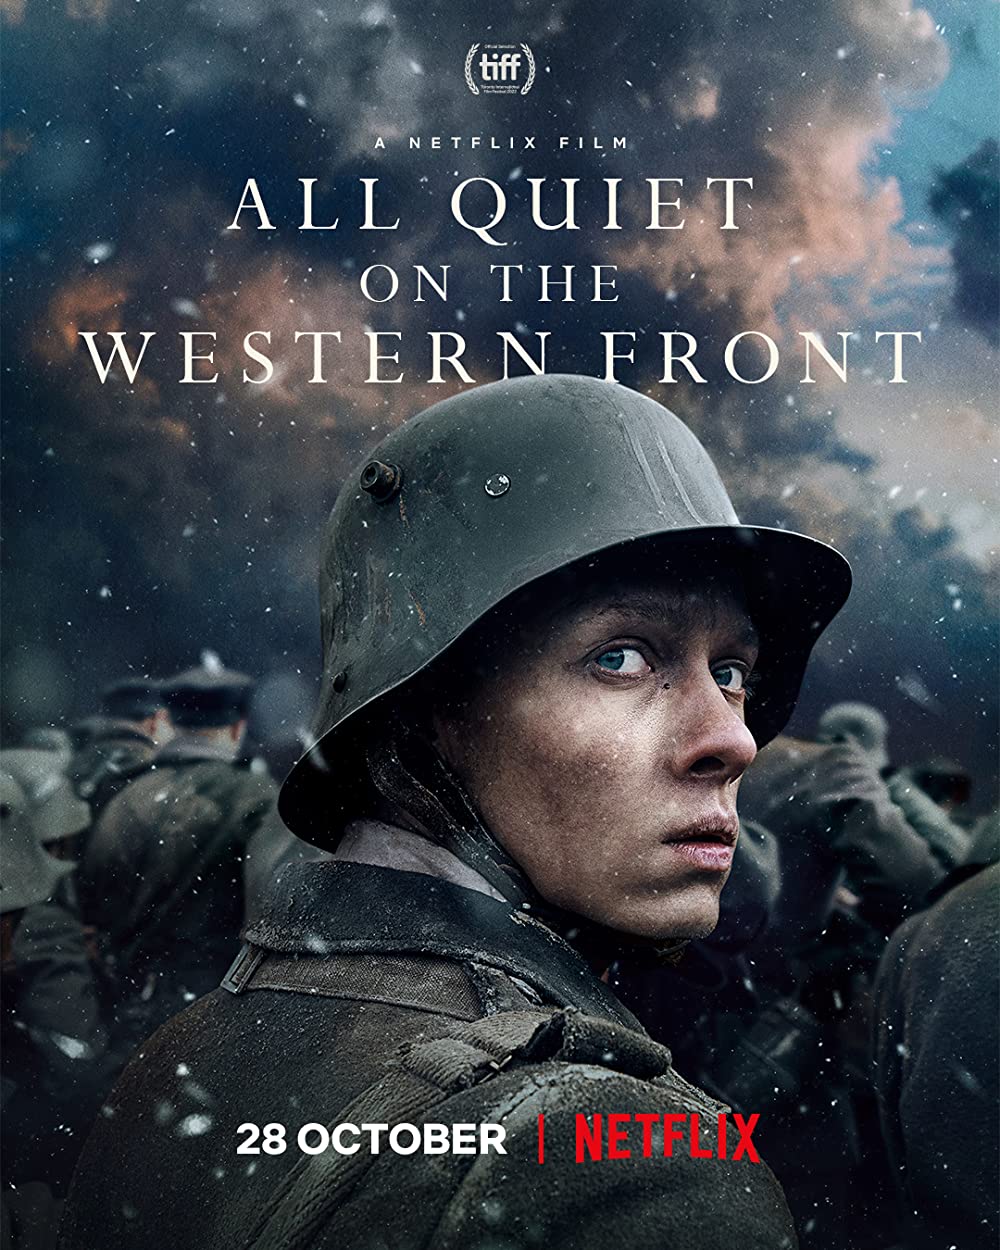 Stiahni si Filmy CZ/SK dabing Na zapadni fronte klid / All Quiet on the Western Front (2022)(FHD)(1080p)(Webdl)(CZ+Multi 6 lang)(MultiSub) = CSFD 73%